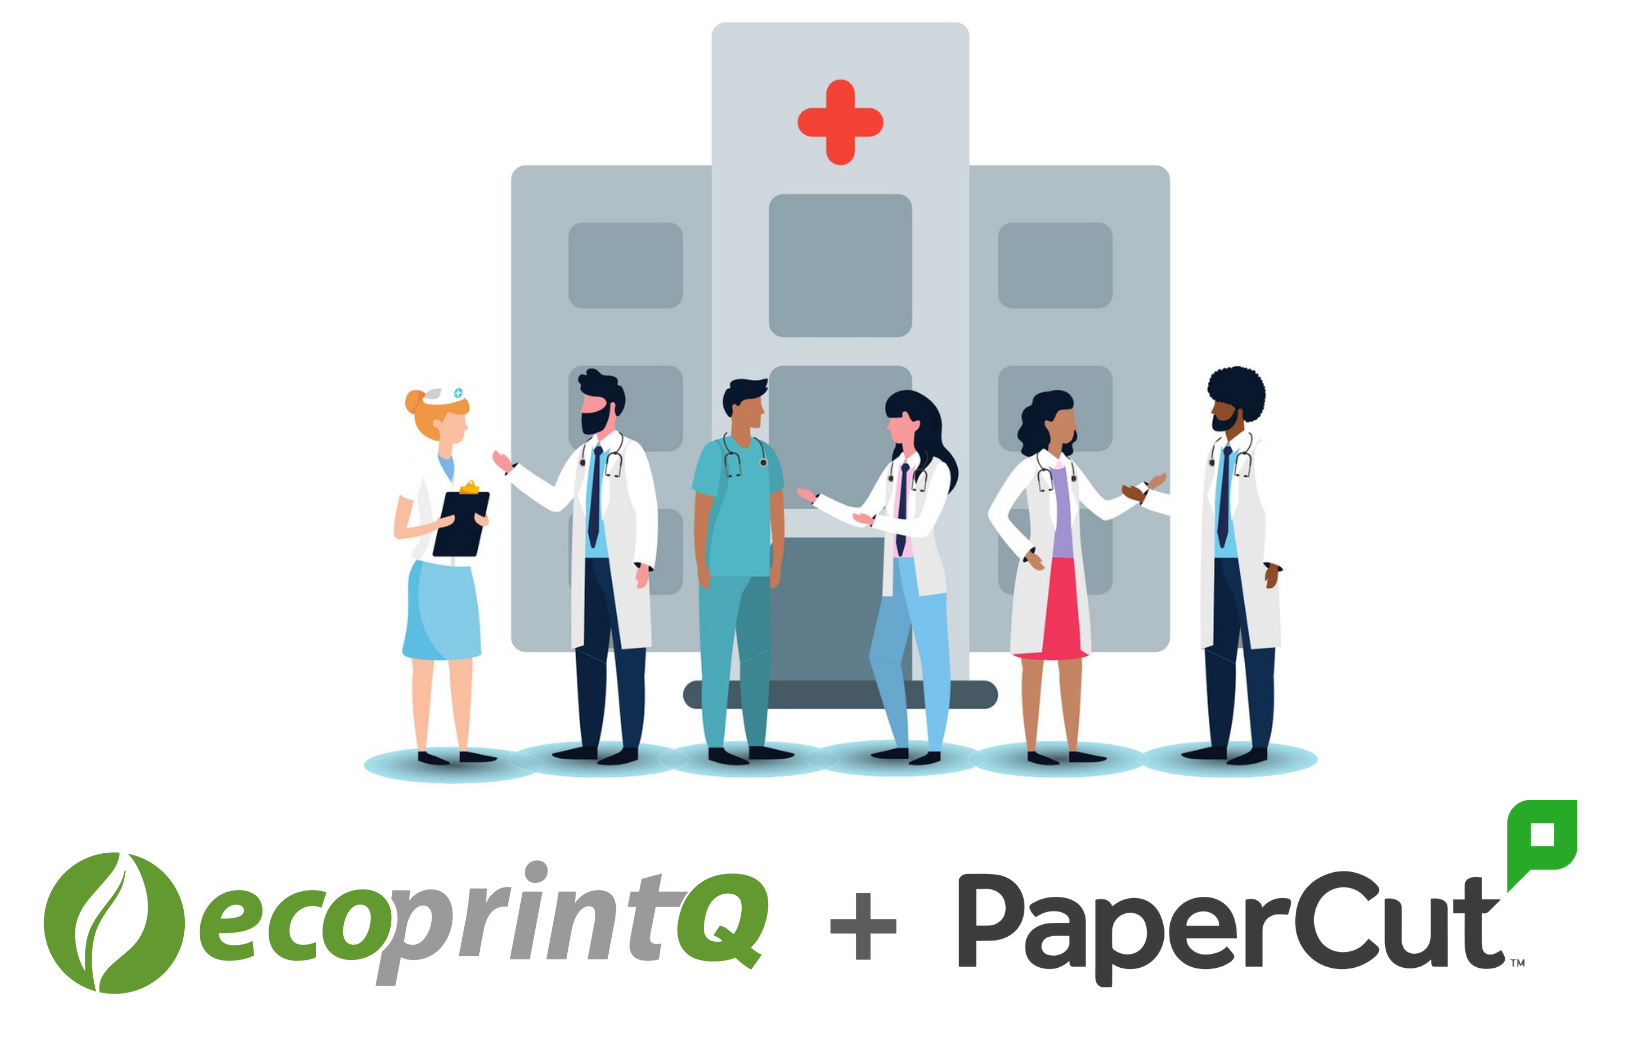 Time is care: simplifying fax integrations for healthcare